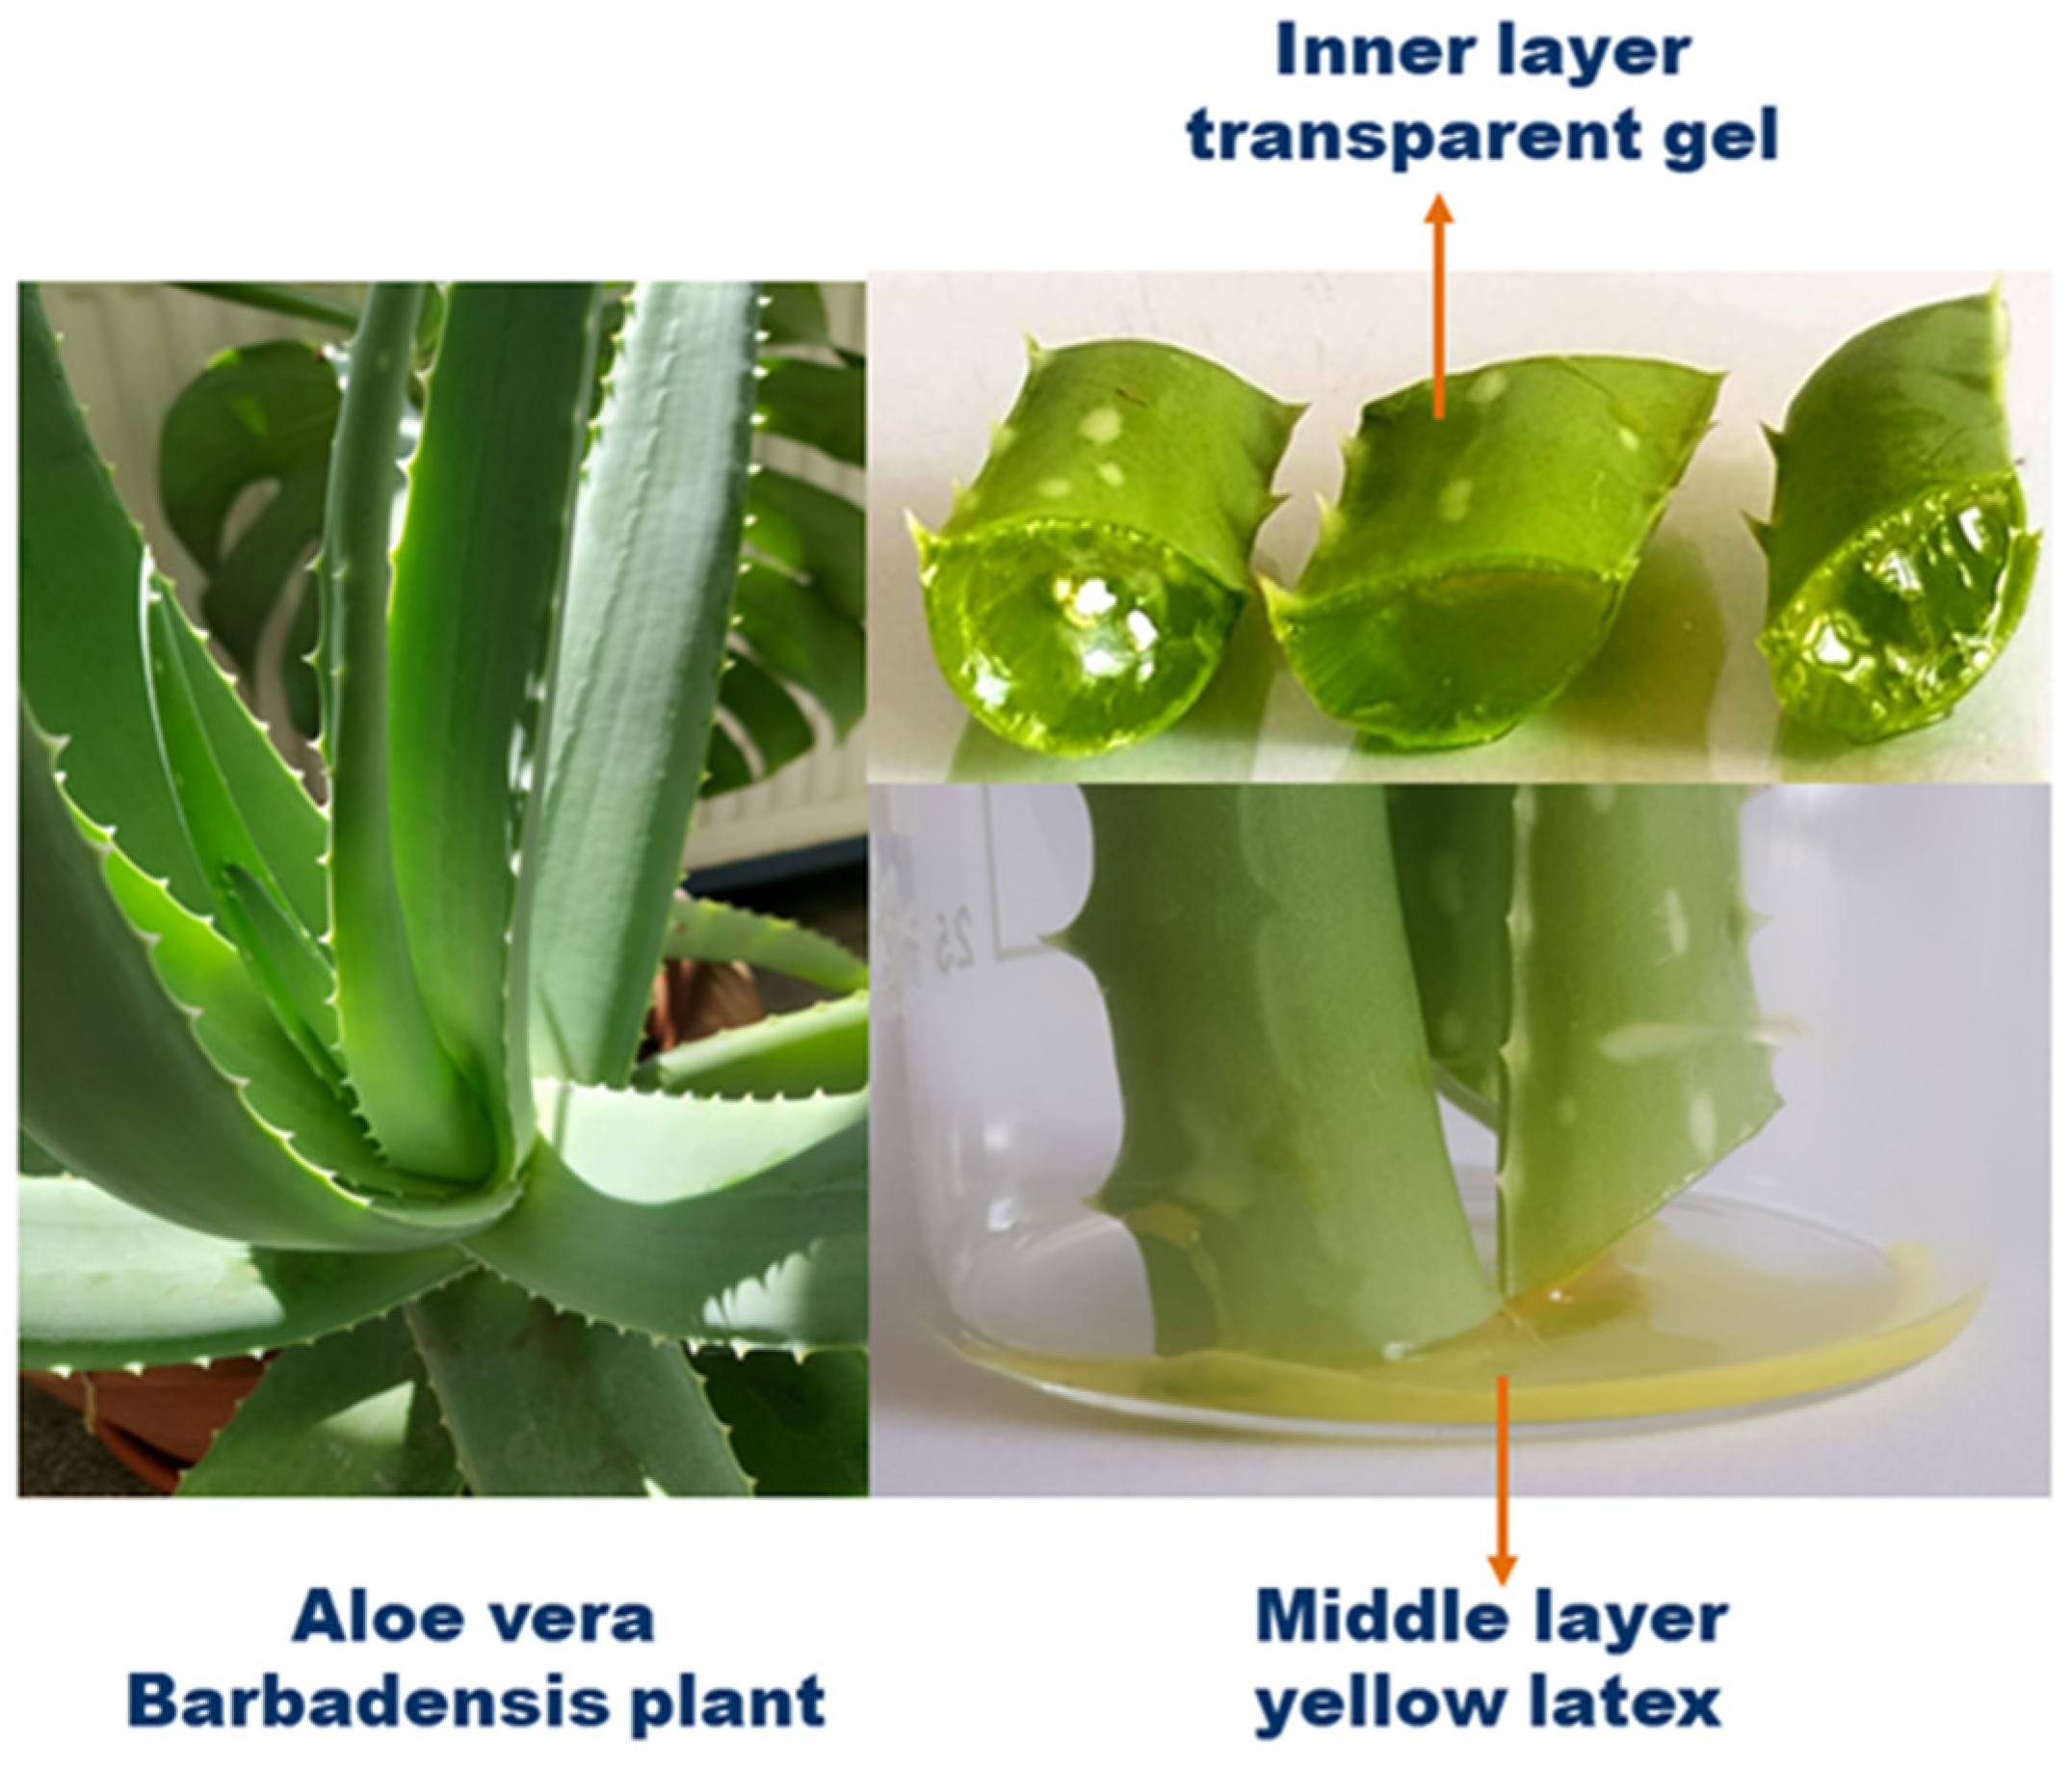 Gels | Free Full-Text | Aloe vera-Based Hydrogels for Wound Healing ...